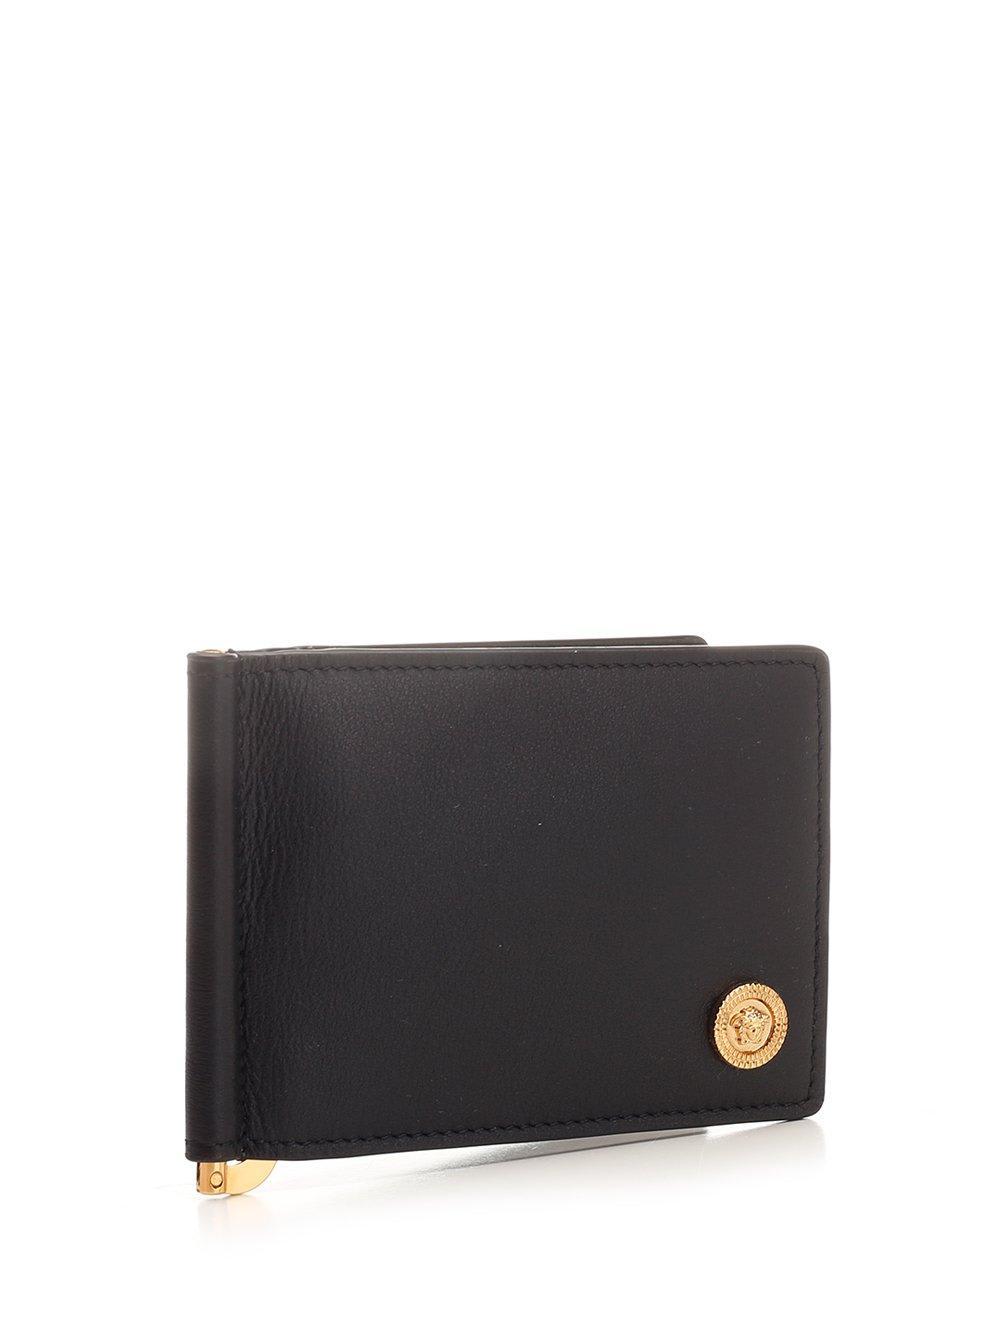 Versace Leather Bifold Wallet - Black Wallets, Accessories - VES140196 |  The RealReal